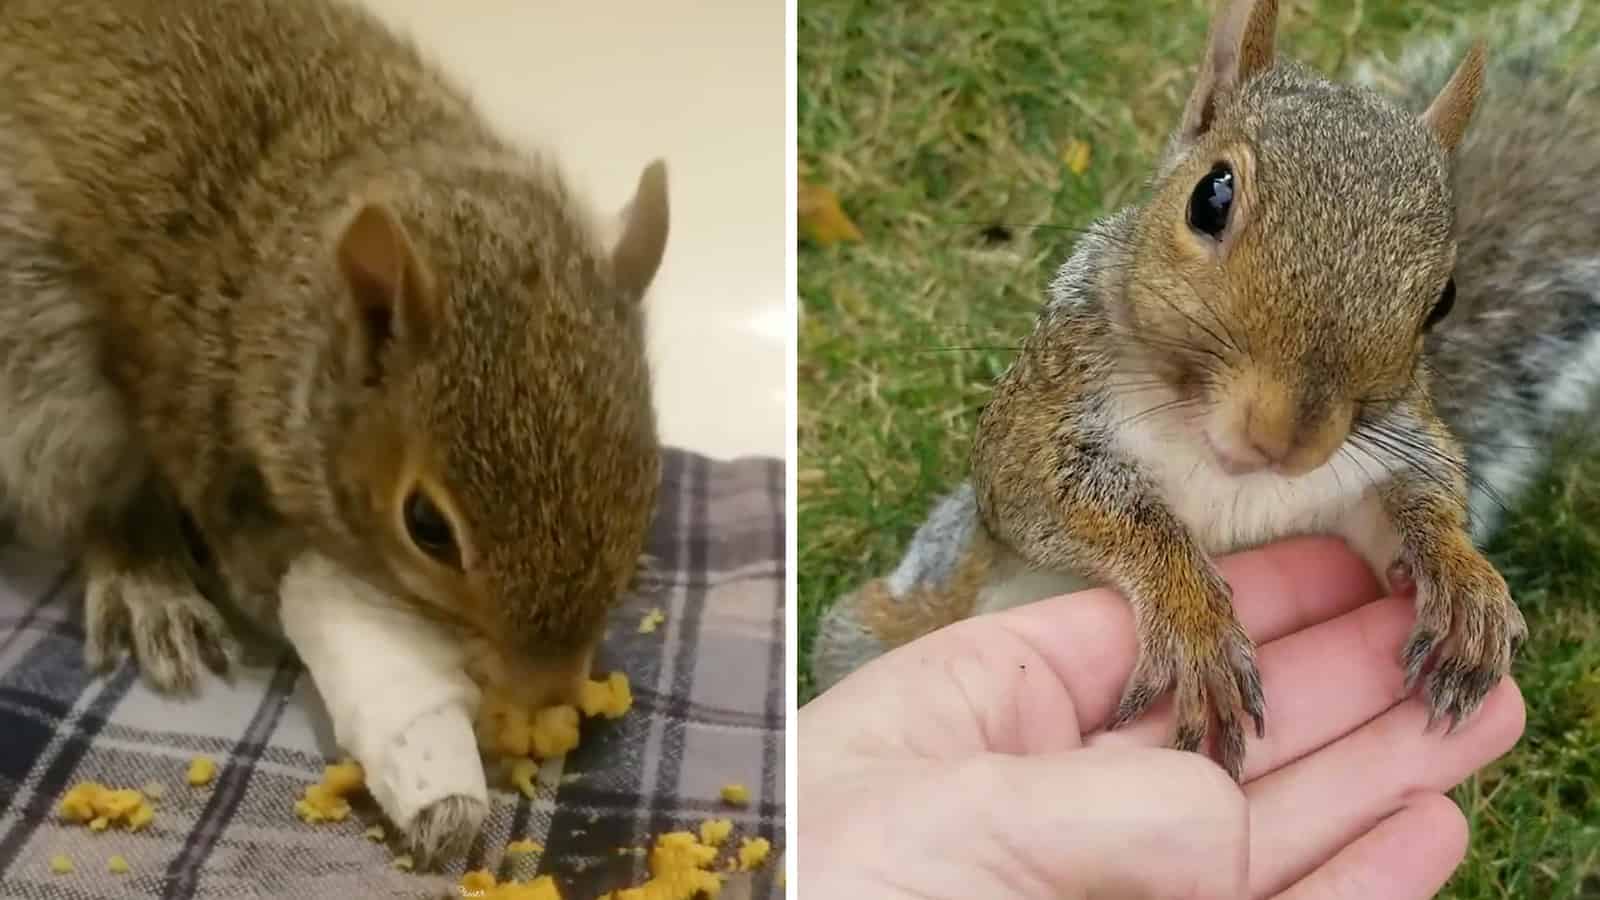 This Abandoned Injured Squirrel Made a Miraculous Recovery